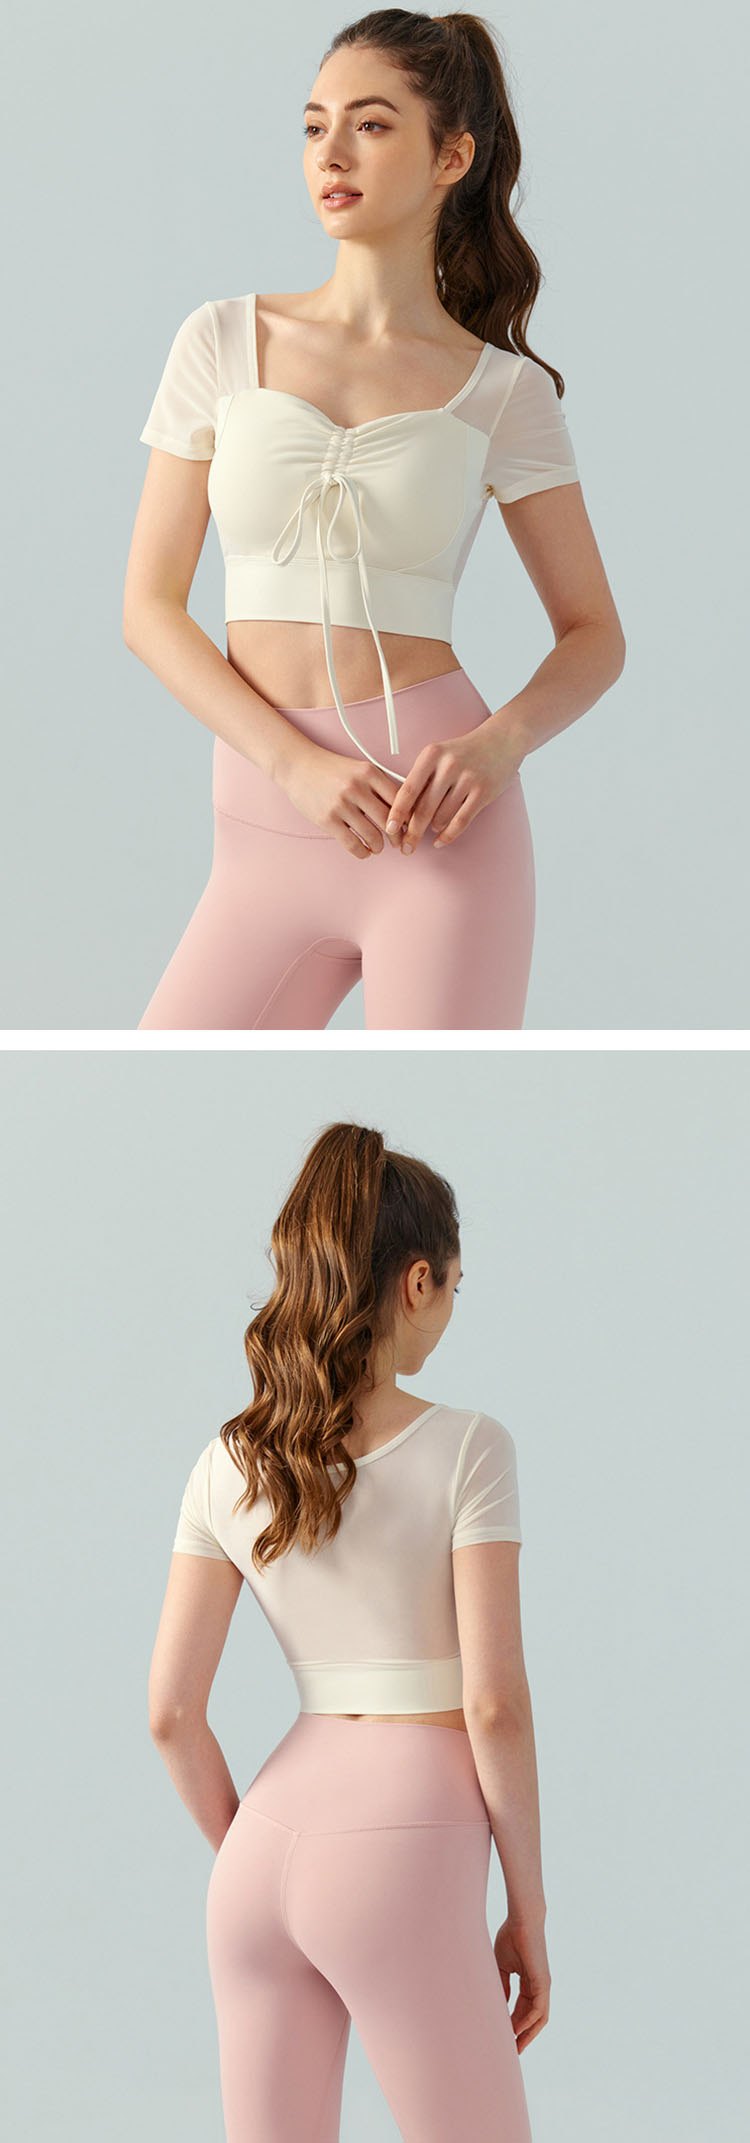 Introducing our stylish Yoga Shirts, designed to enhance your comfort while accentuating your sexy